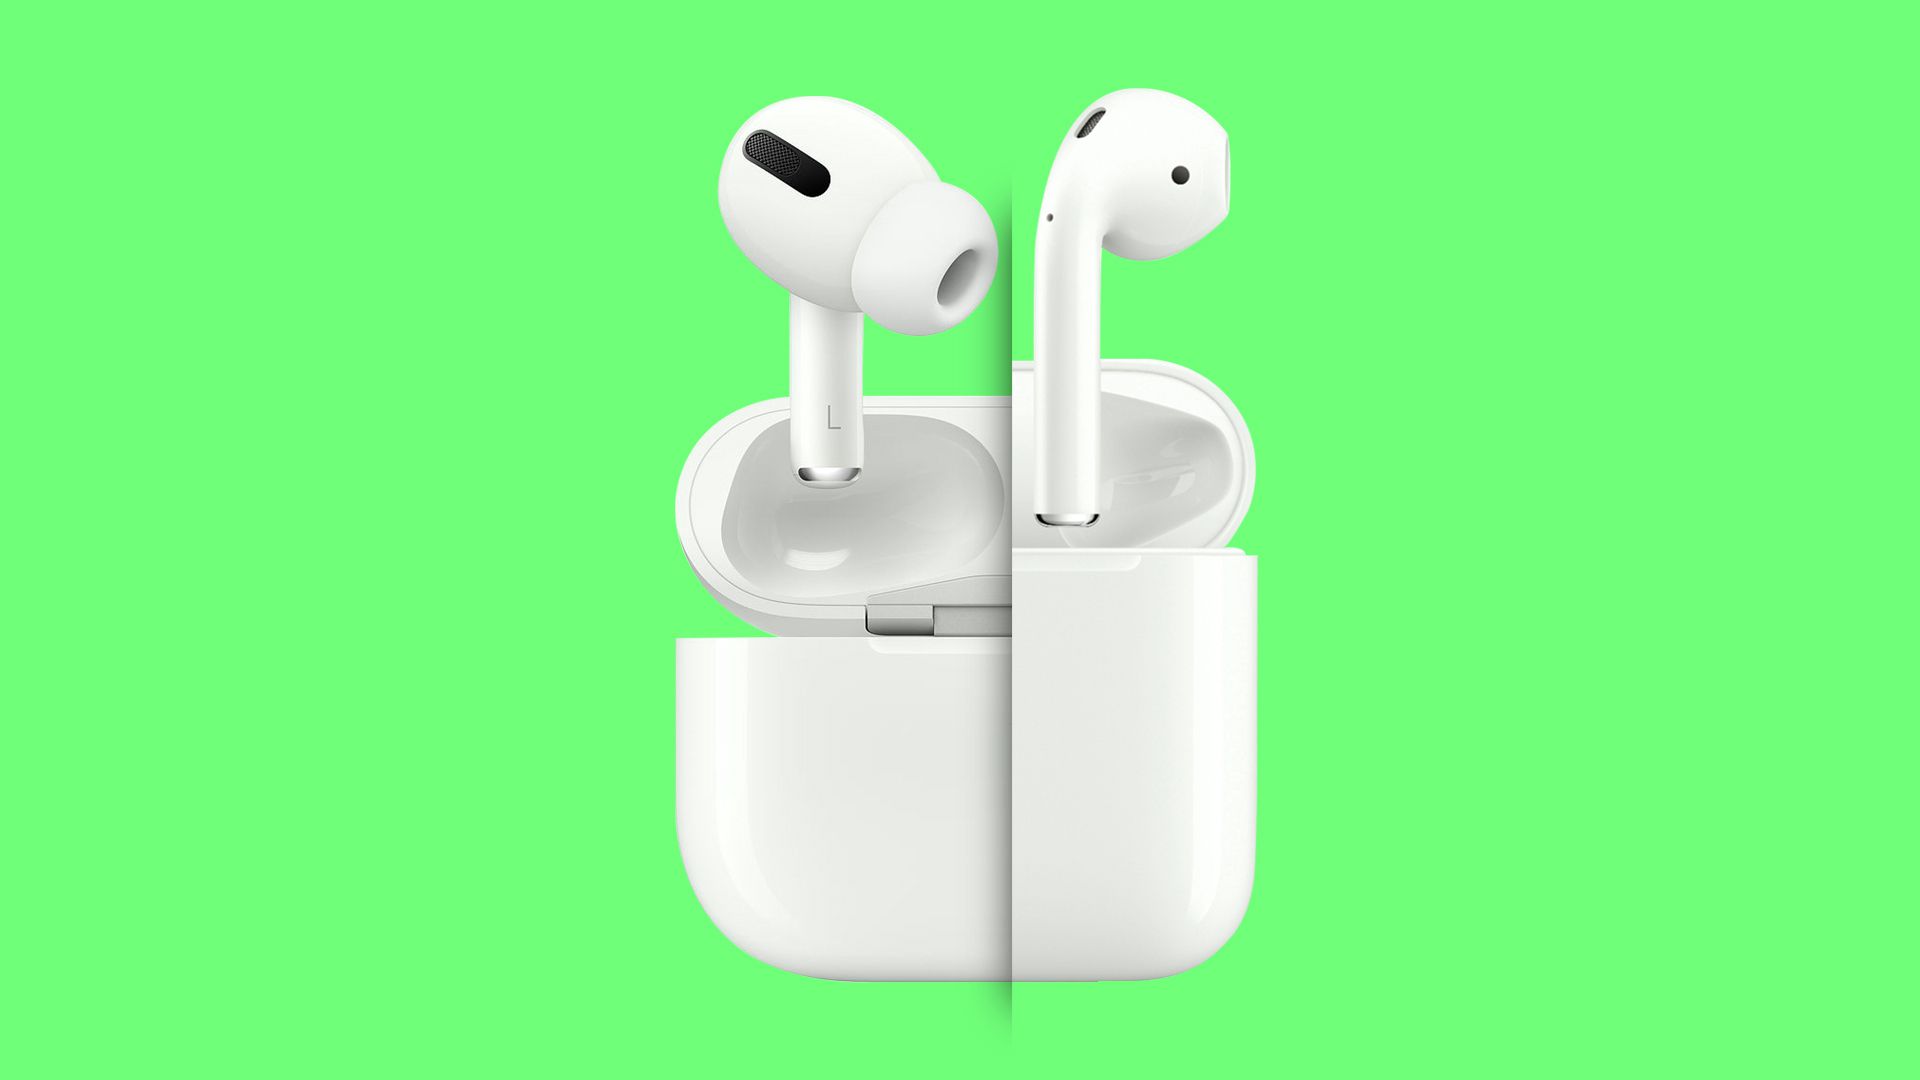 Airpods pro huilian. AIRPODS Pro 2021. Apple AIRPODS Pro 2 новая модель. AIRPODS Pro 5. AIRPODS Pro 3.